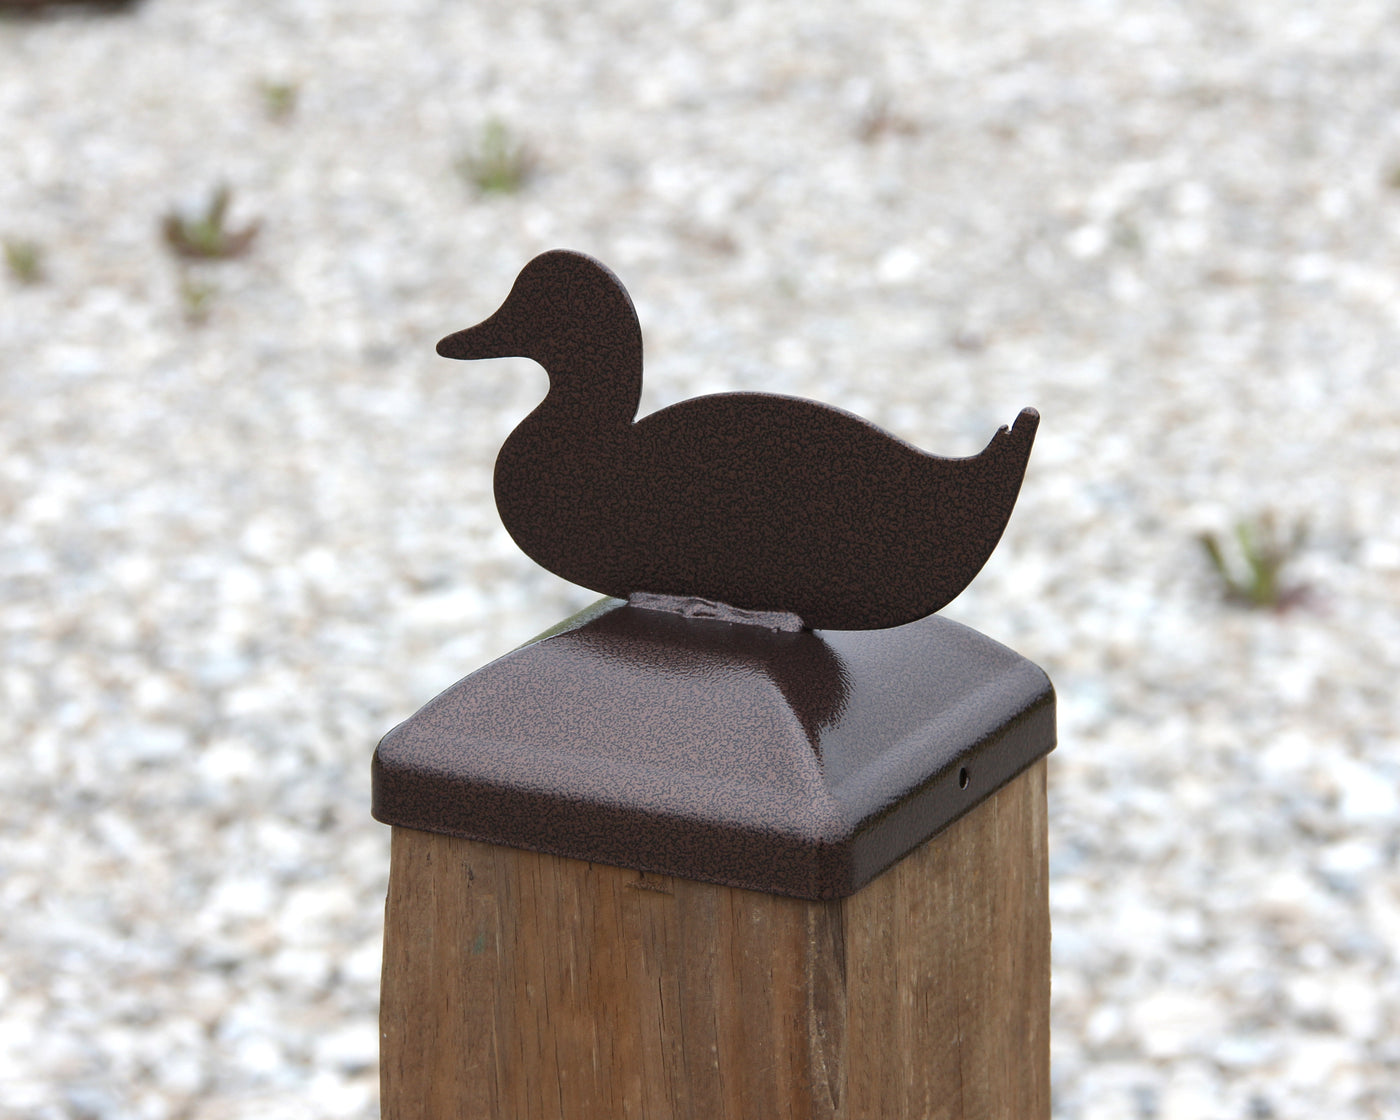 6x6 Duck Post Cap - Madison Iron and Wood - Post Cap - metal outdoor decor - Steel deocrations - american made products - veteran owned business products - fencing decorations - fencing supplies - custom wall decorations - personalized wall signs - steel - decorative post caps - steel post caps - metal post caps - brackets - structural brackets - home improvement - easter - easter decorations - easter gift - easter yard decor